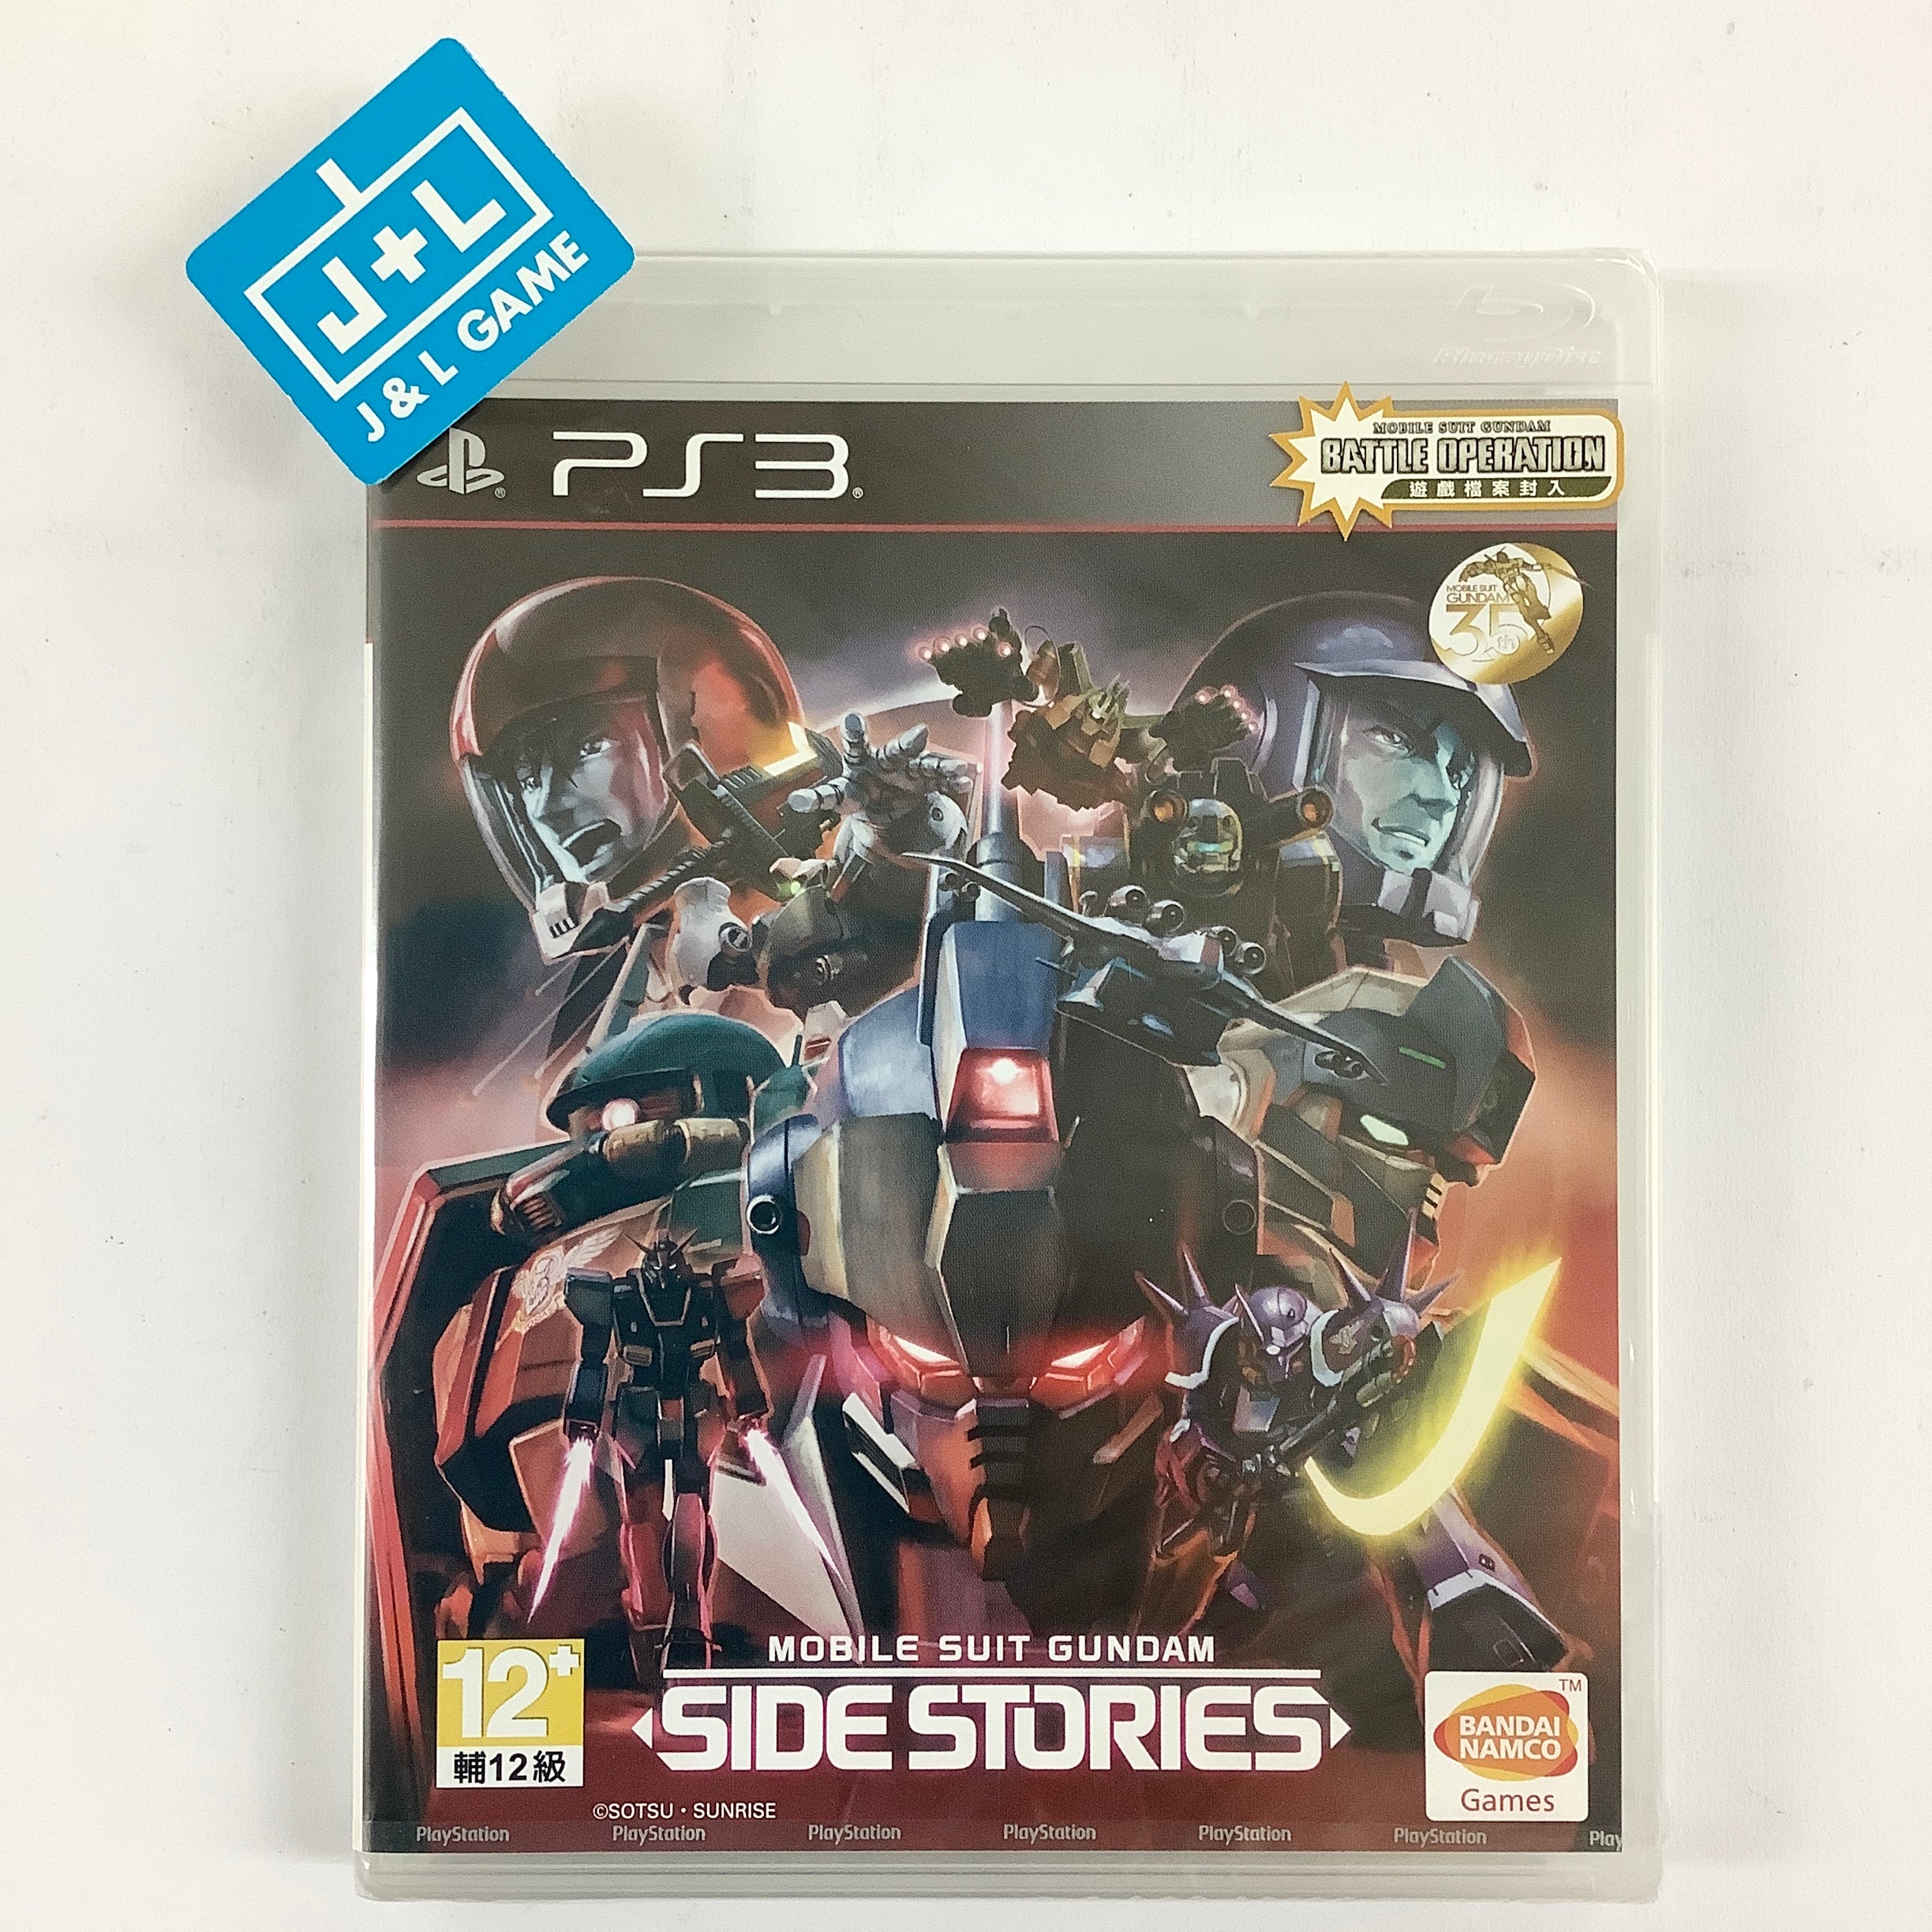 Mobile Suit Gundam Side Stories (Chinese Subtitles) - (PS3) PlayStation 3 (Asia Import) Video Games Namco Bandai Games   